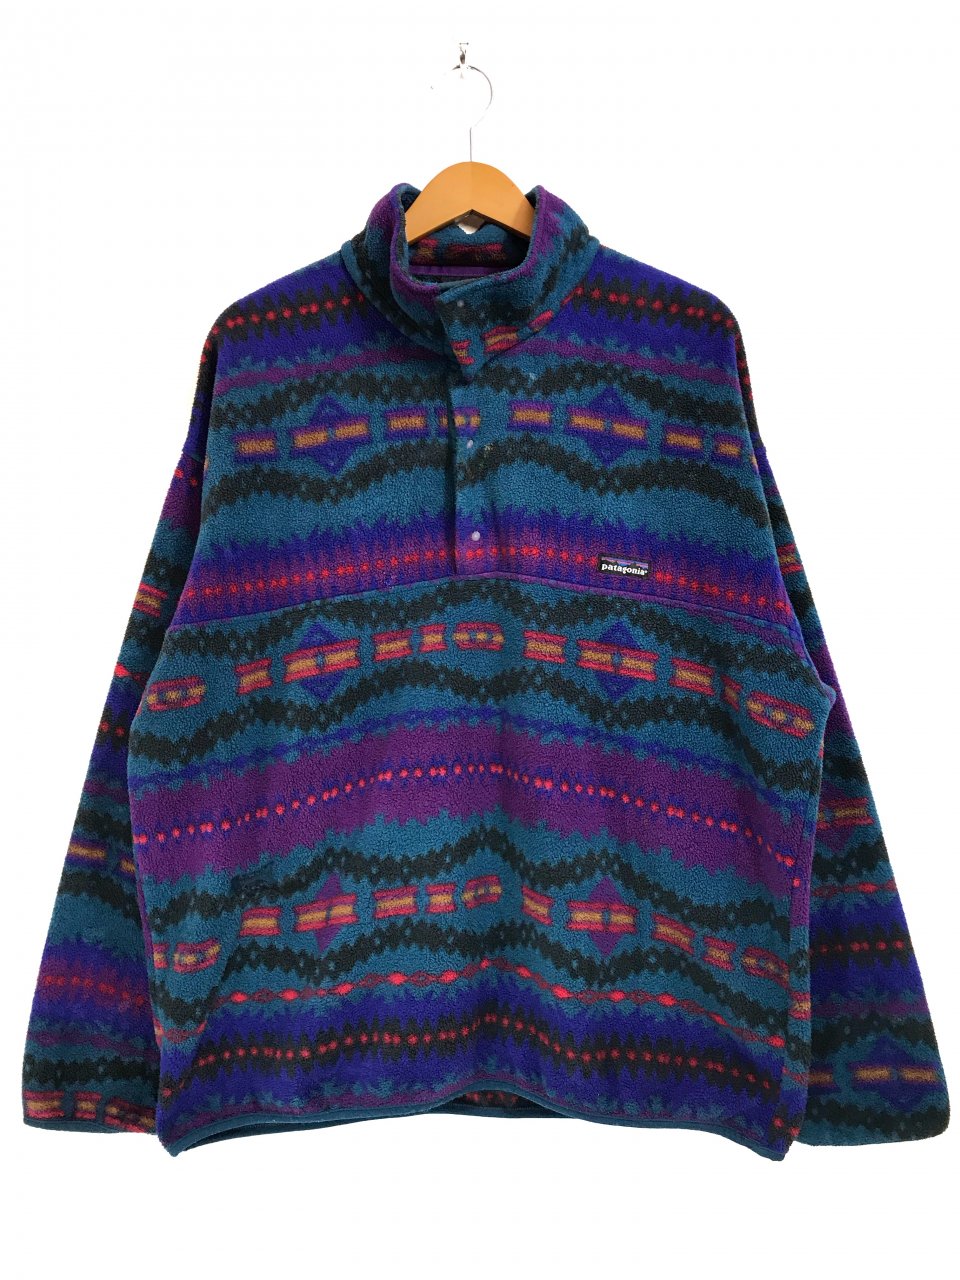 USA製 94年 patagonia Synchilla Snap-T Pullover 